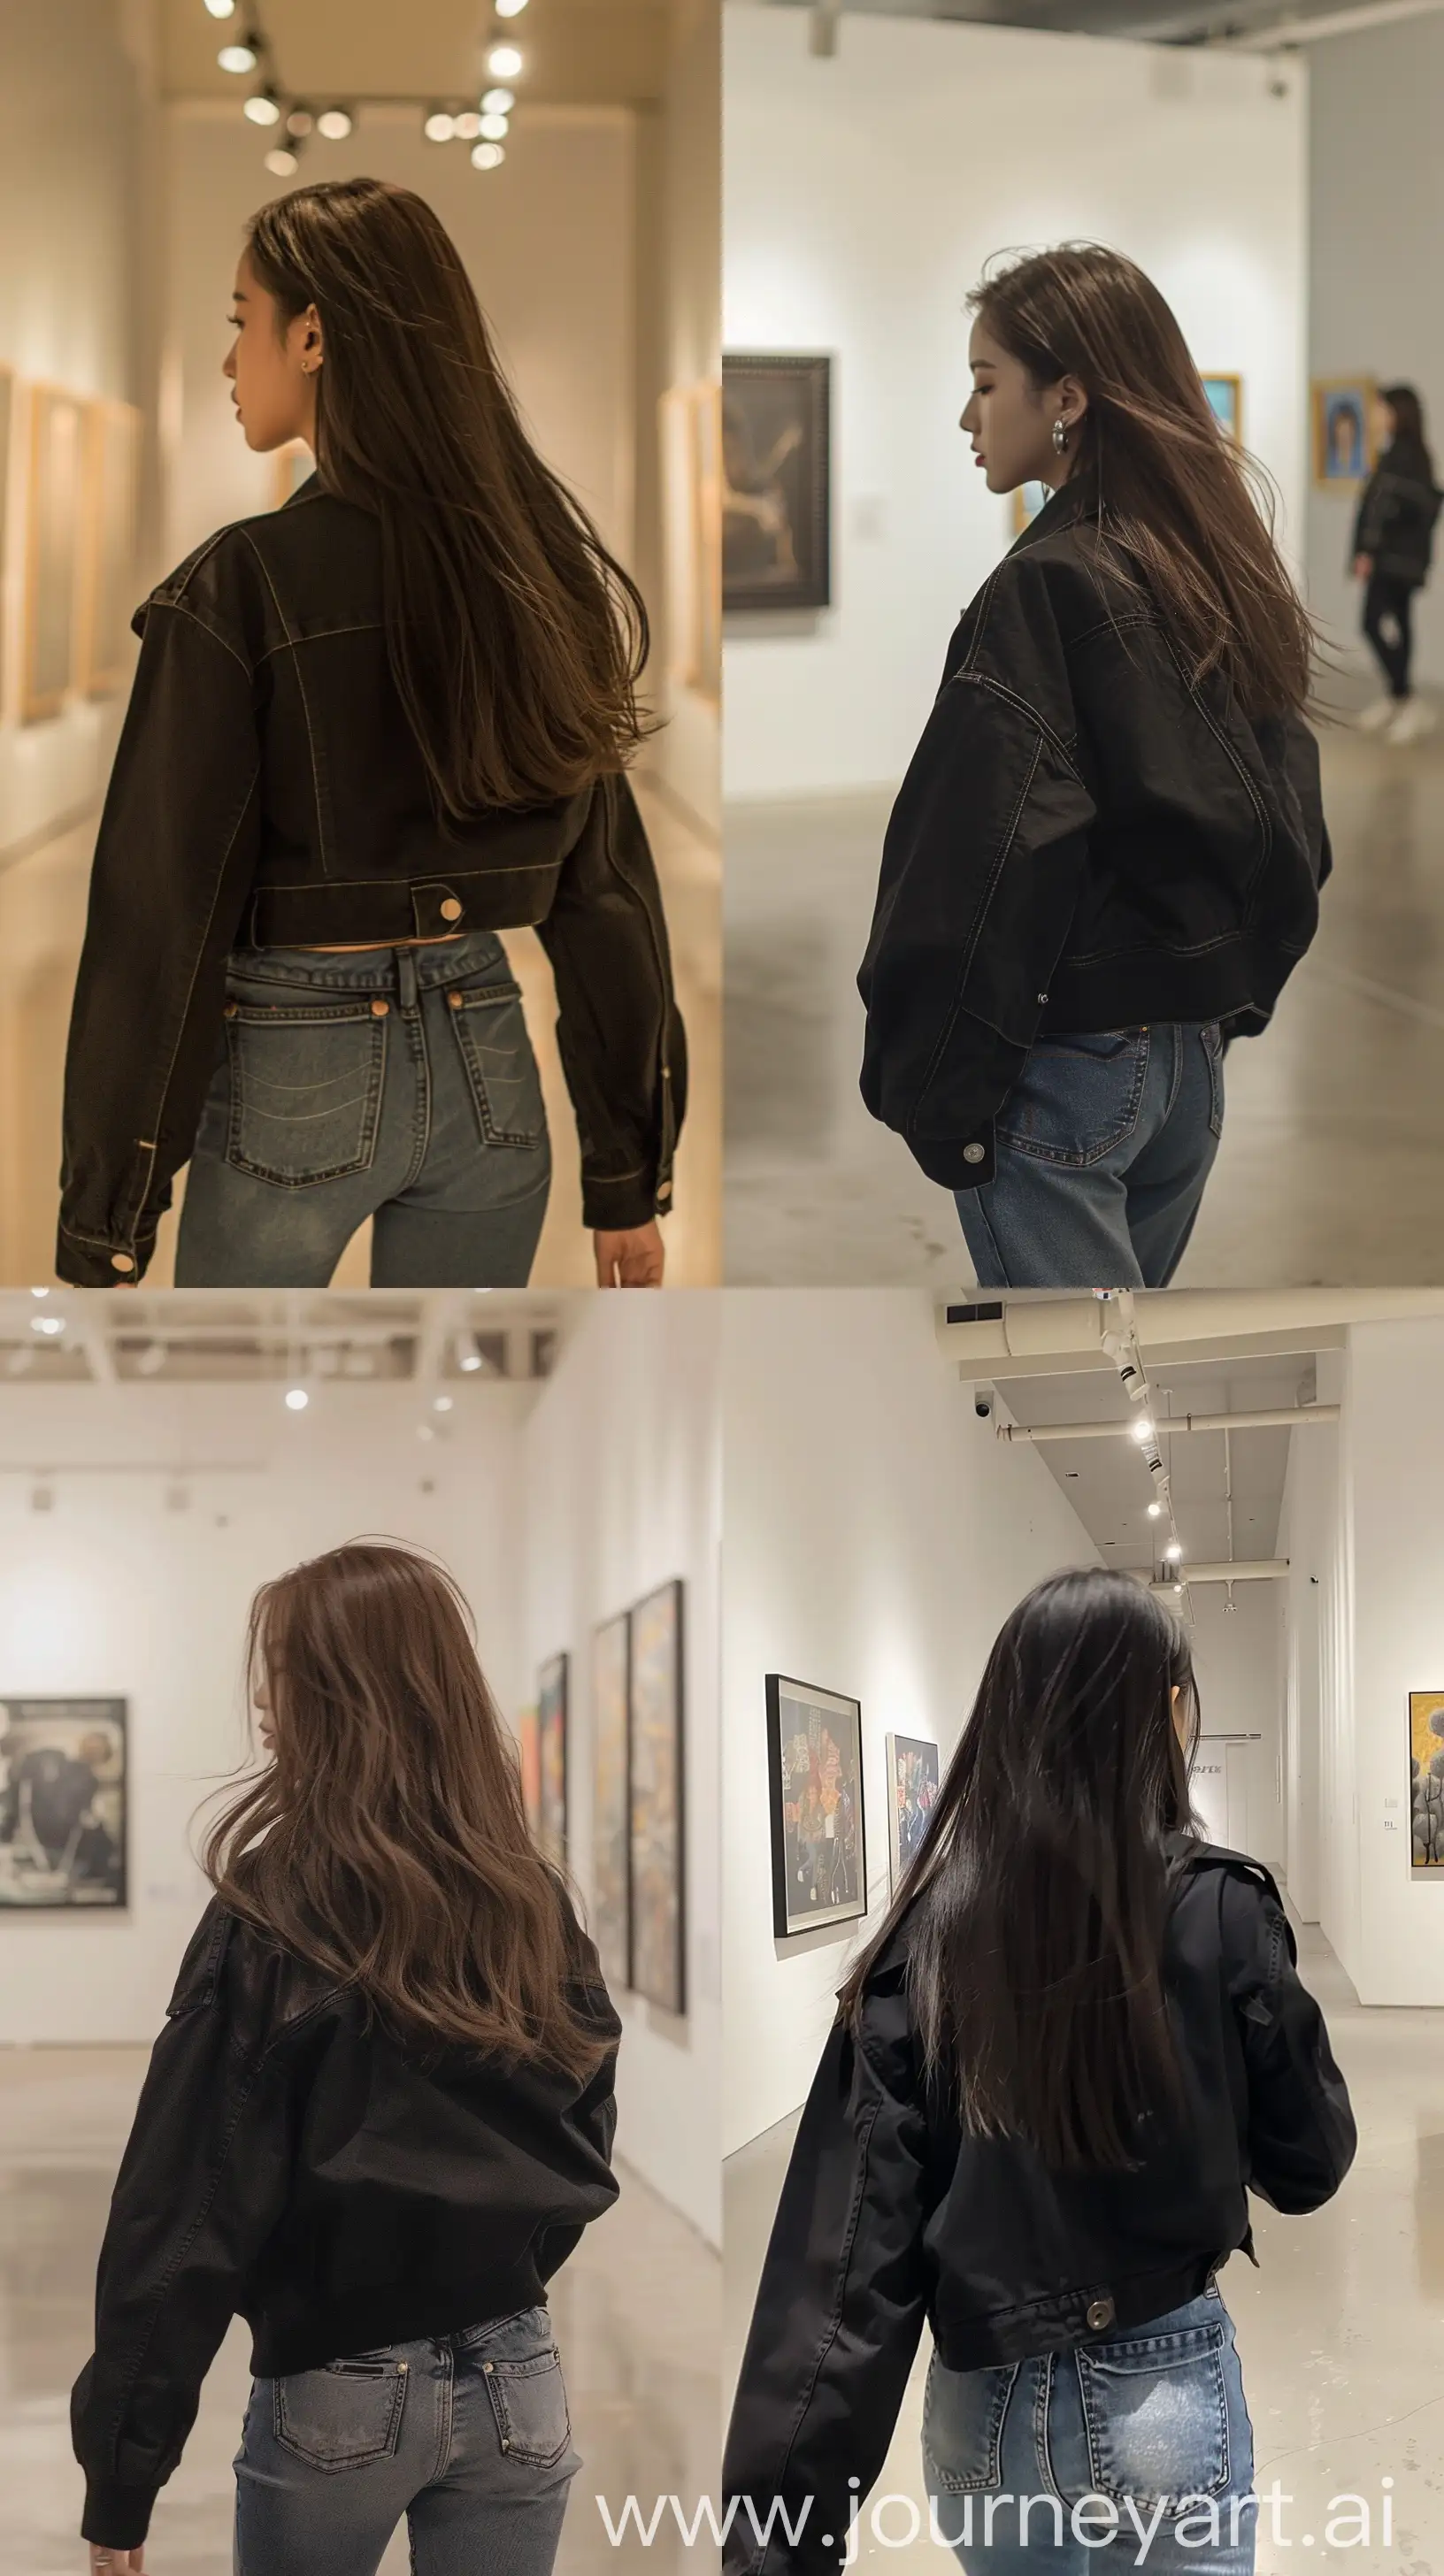 Aesthetic instagram picture, blackpink's, medium hair, jennie wearing black jacket and jeans pants walking art gallery, back body, throw face away --ar 9:16